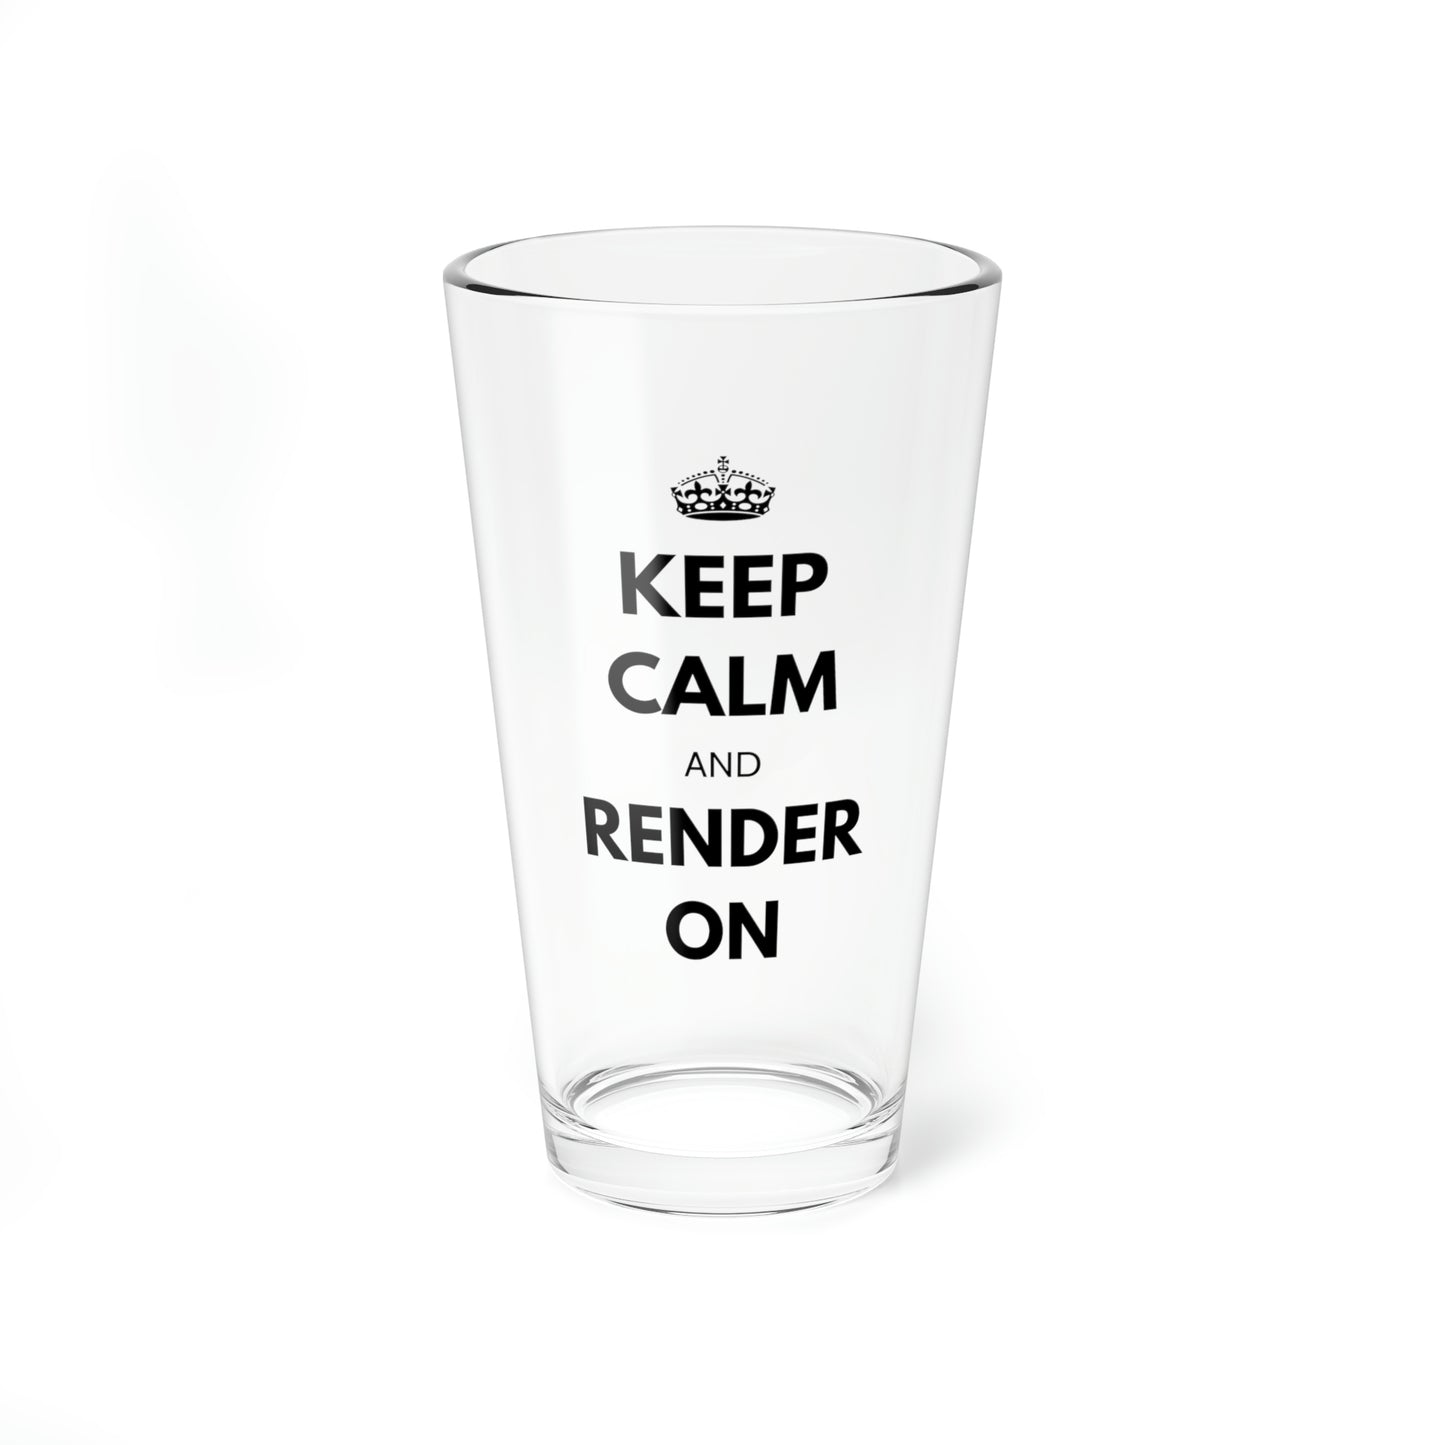 Keep Calm and Render On Mixing Glass, 16oz